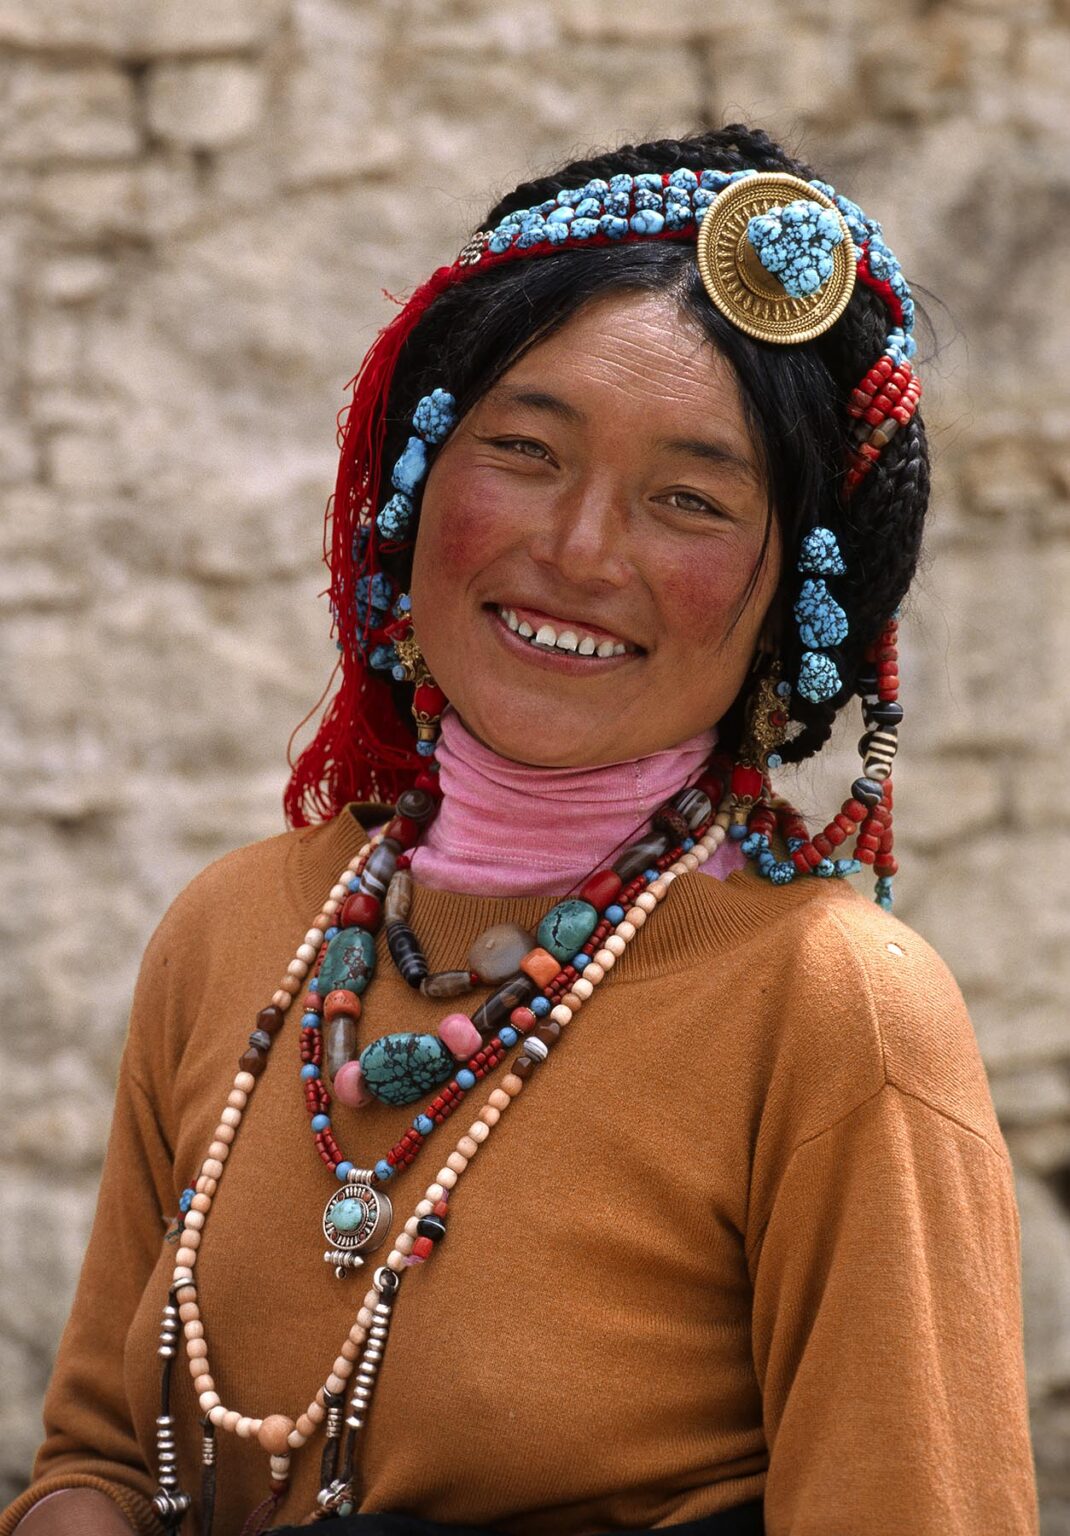 TIBETAN WOMAN with full complement of TRADITIONAL JEWELRY - LHASA, TIBET